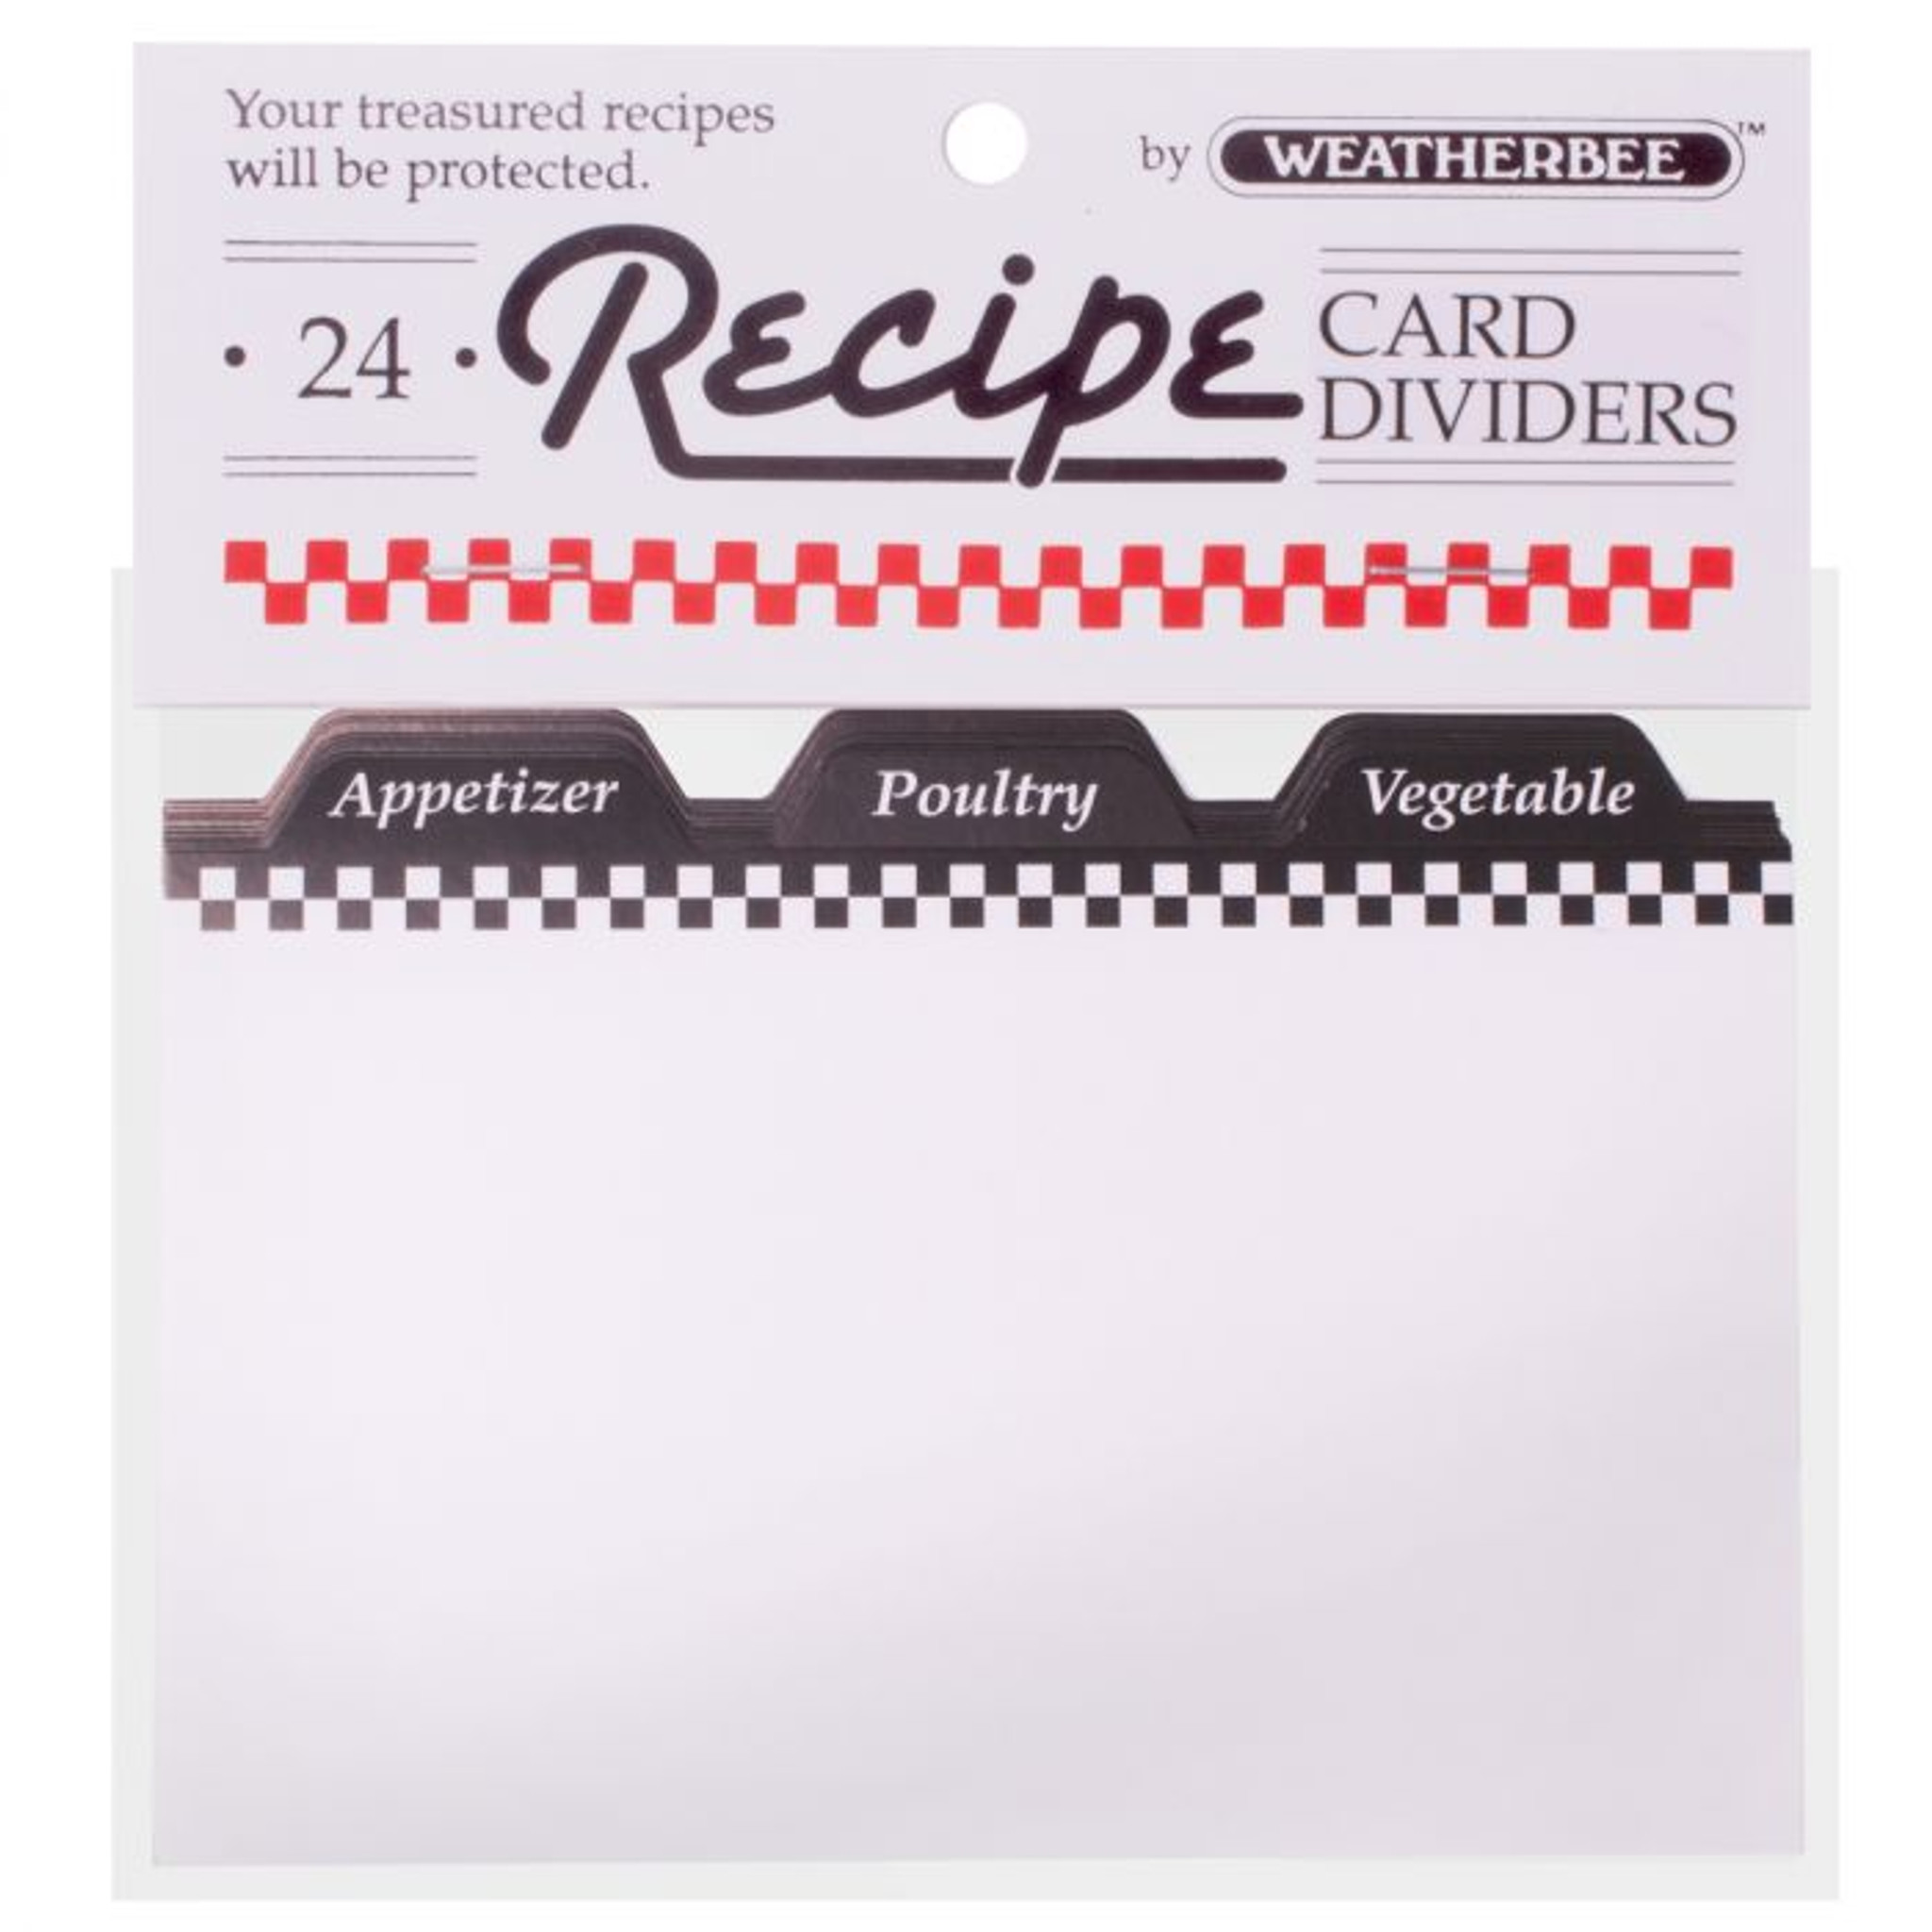 New Card Dividers On